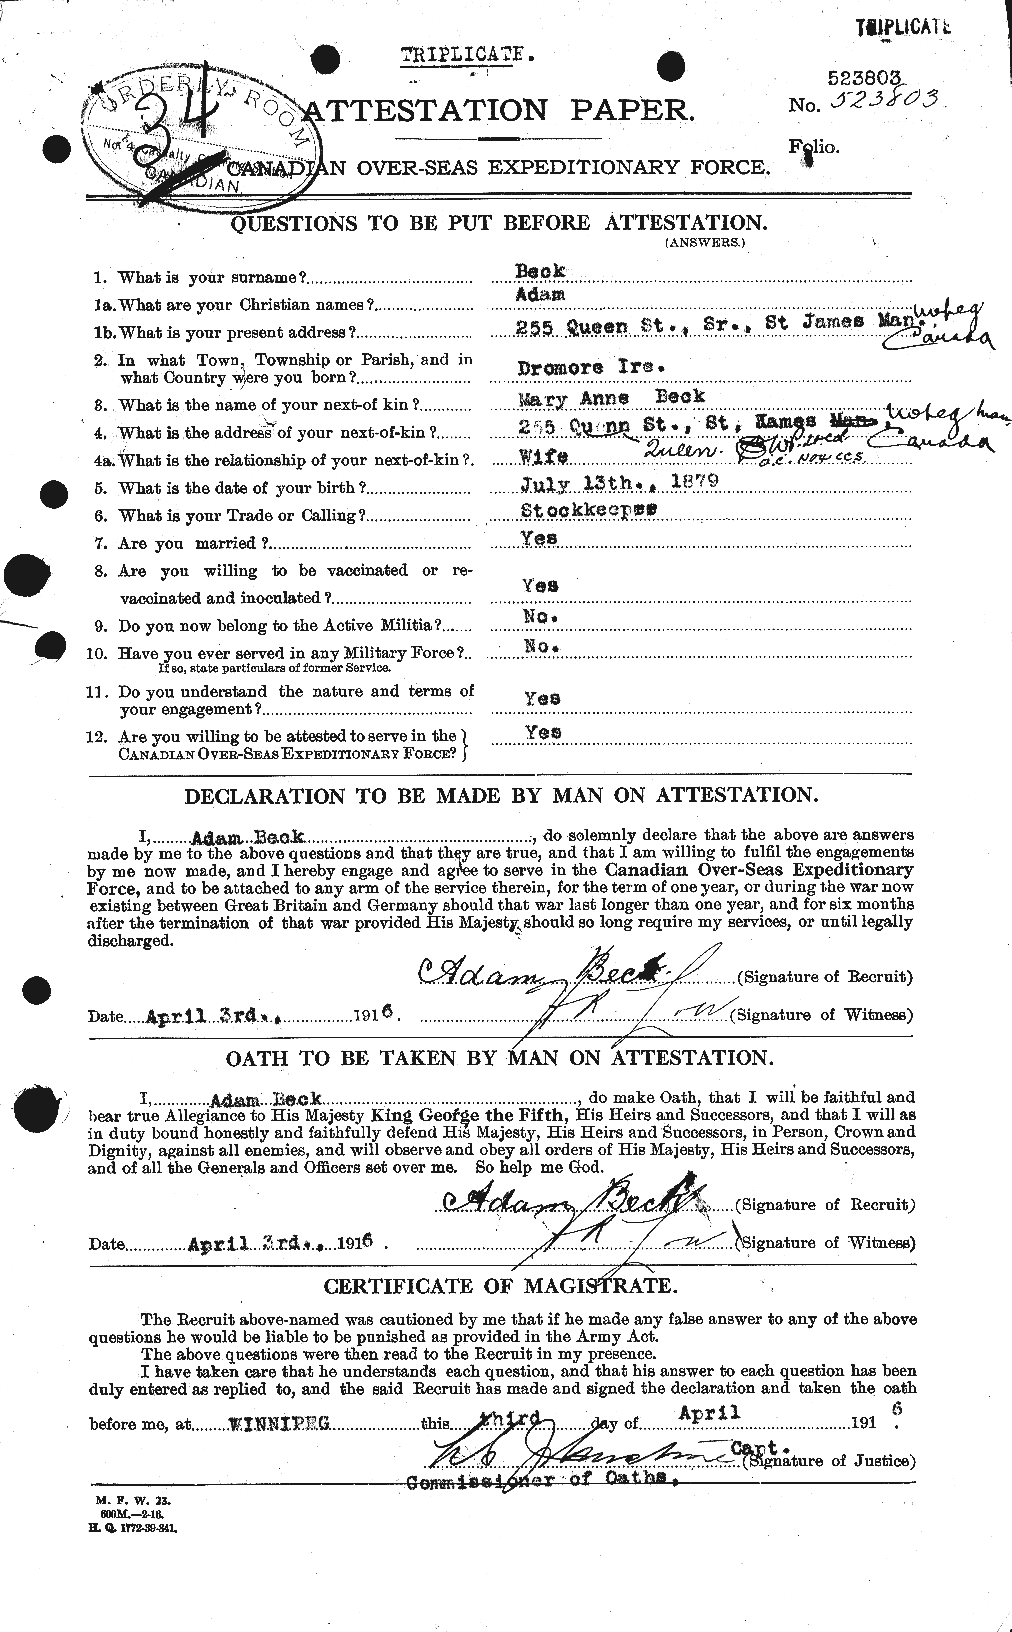 Personnel Records of the First World War - CEF 232072a